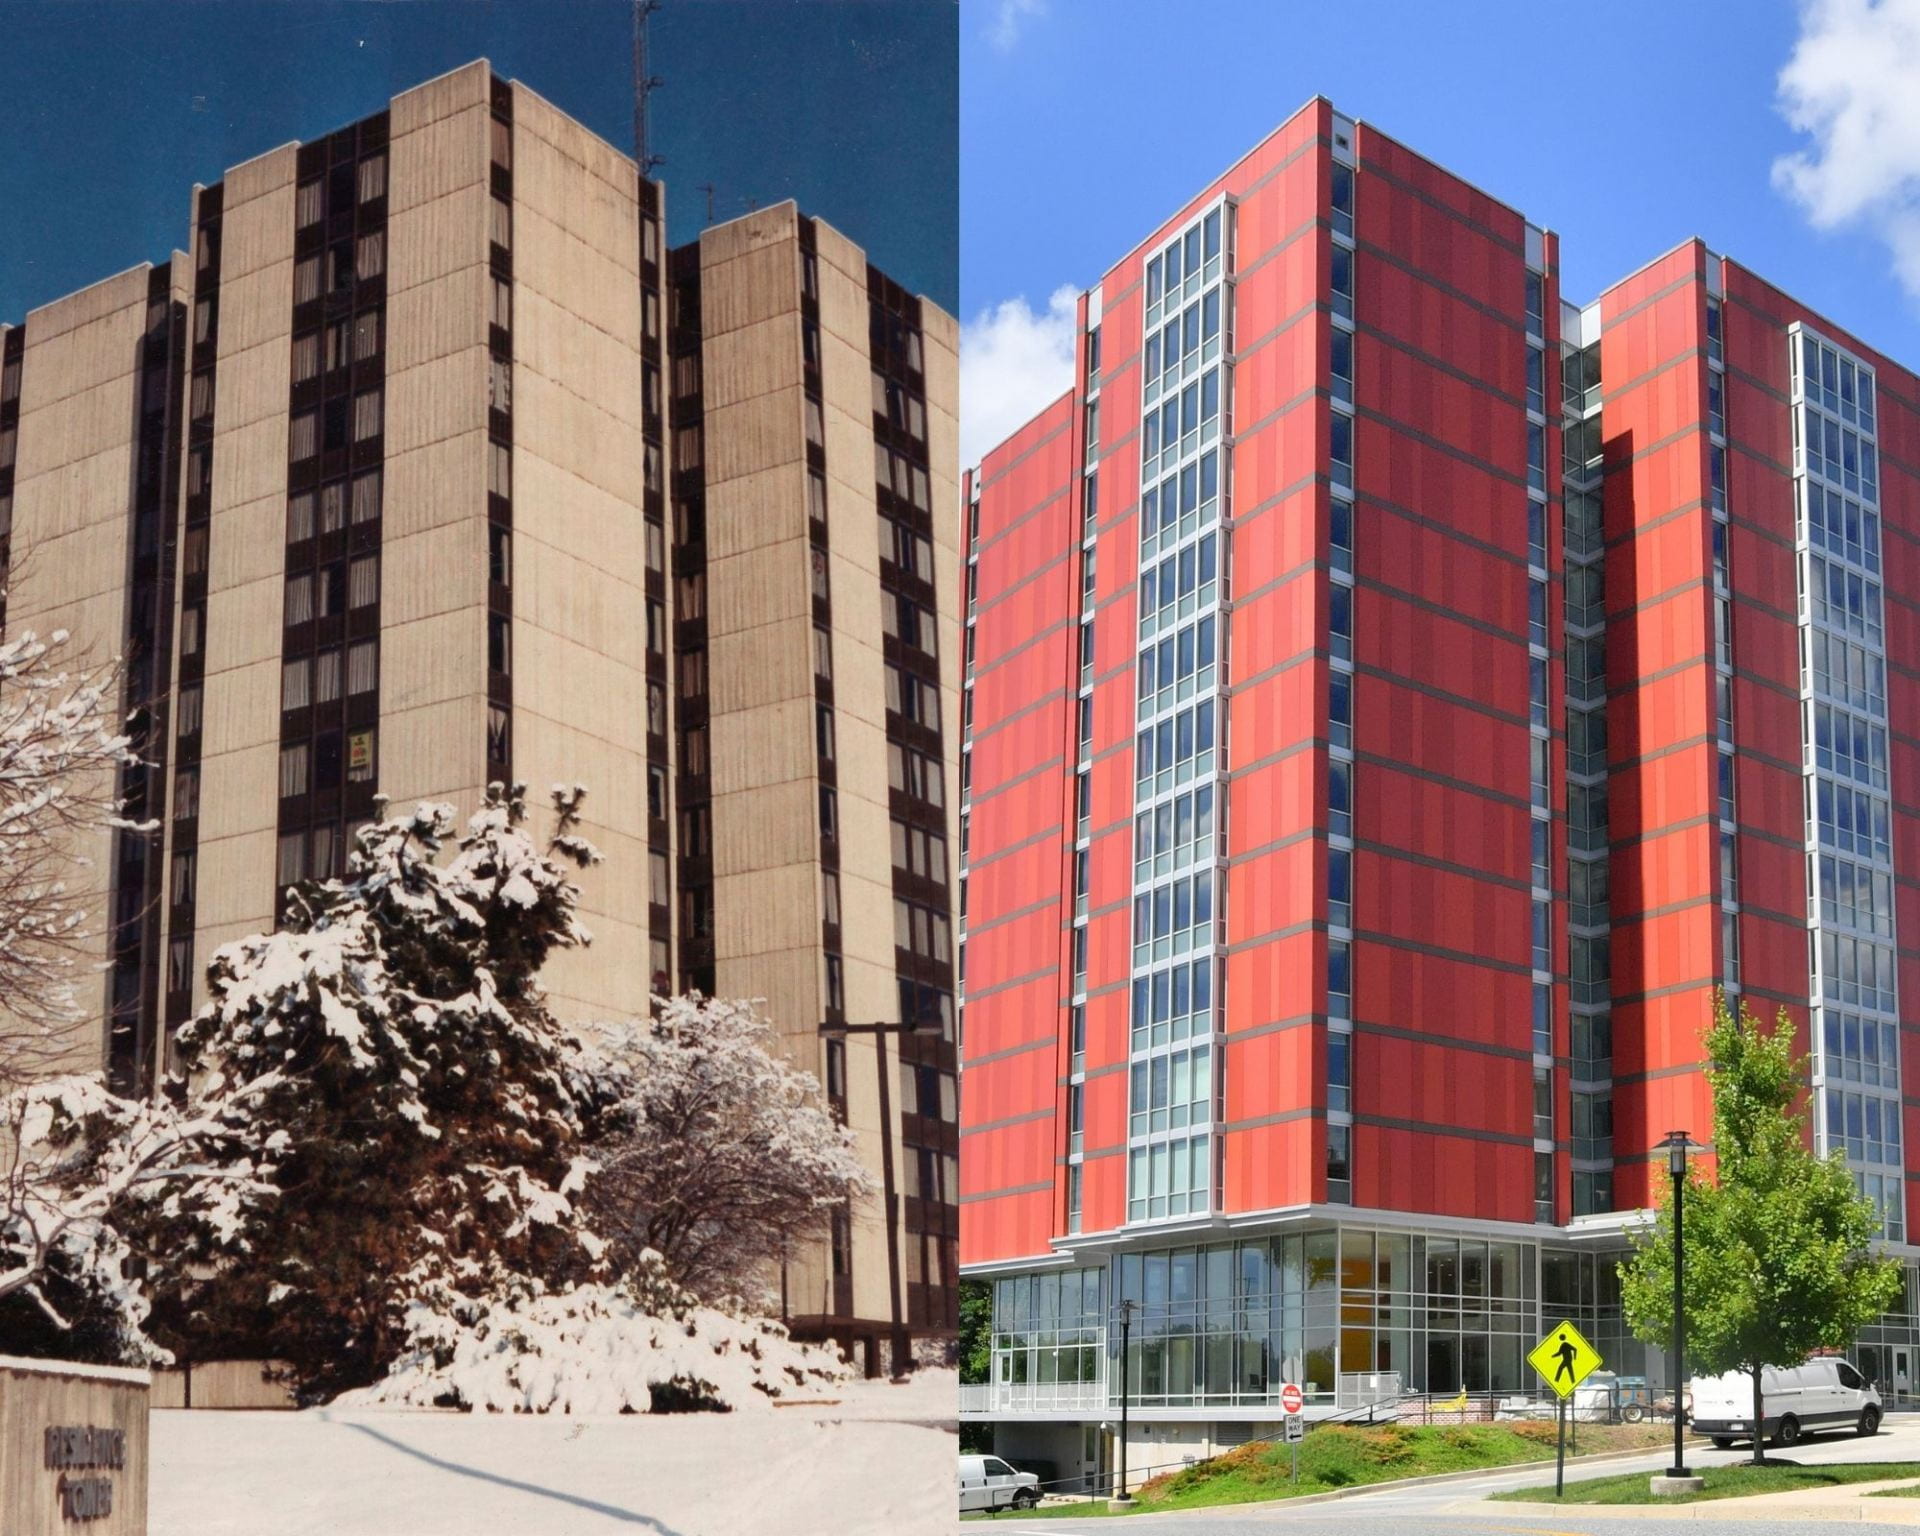 The Residence Tower before the 2018 renovation and after.